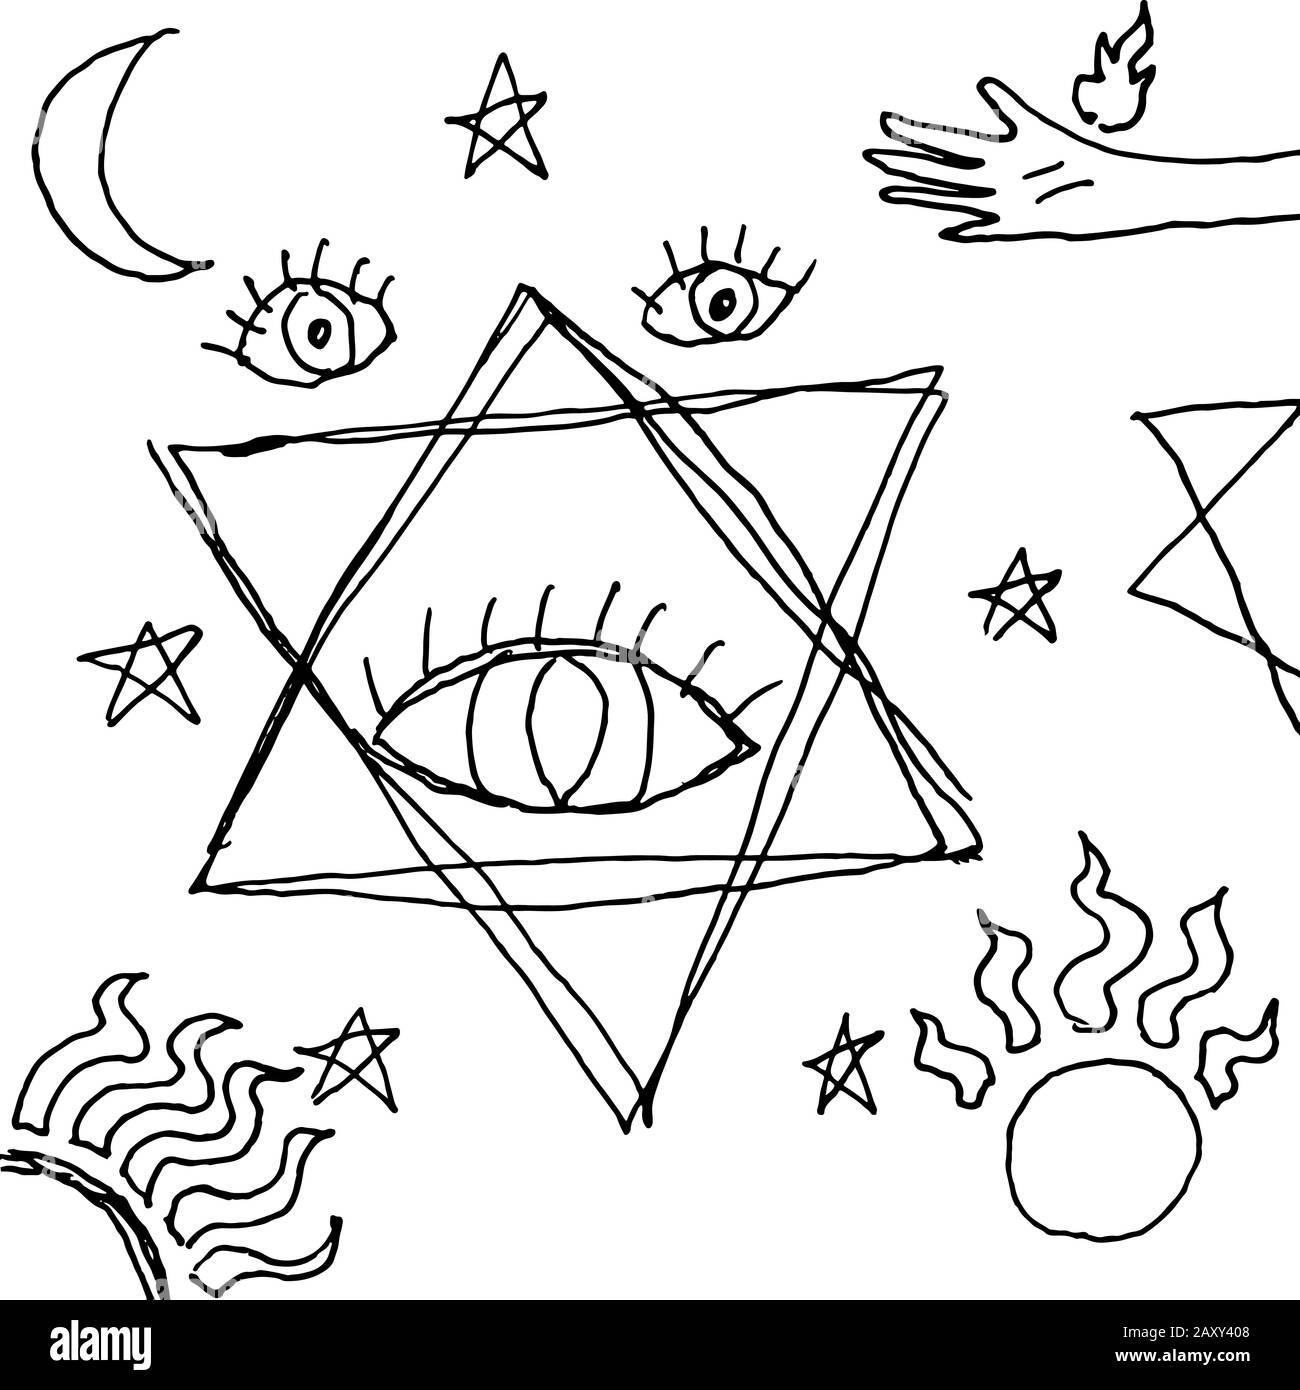 Hand drawn doodle esoteric pattern. Black and white sketch background. Mystic eye, stars, sun, moon and hand. Vector illustration. Stock Vector